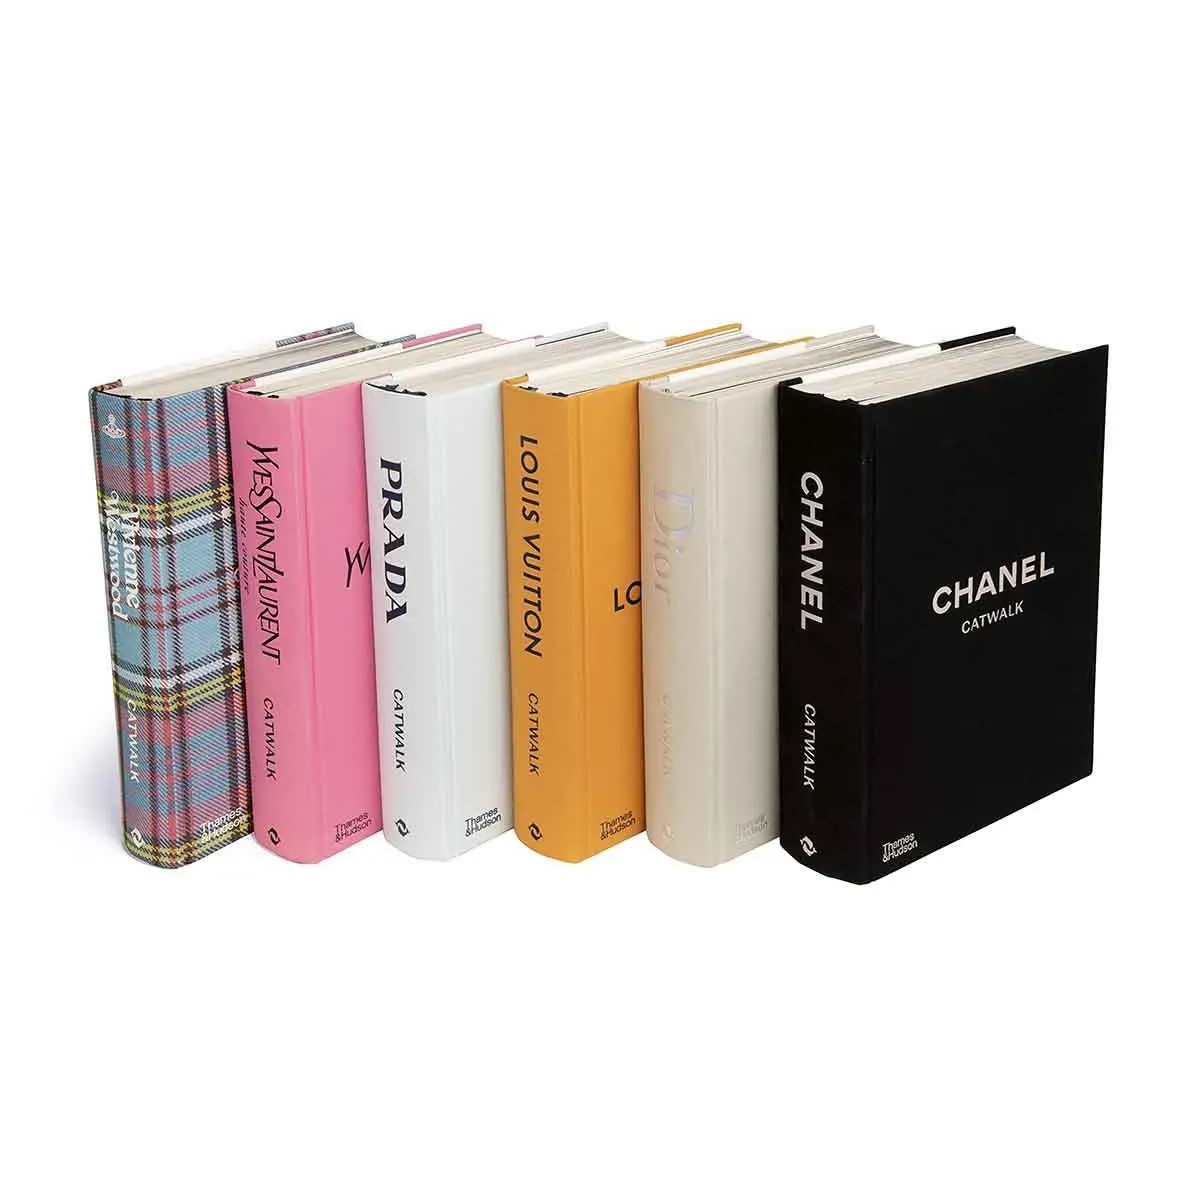 Chanel+Catwalk%3A+The+Complete+Collections+by+Patrick+Mauries%2C+Adelia+Sabatini+%28Hardcover%2C+2020%29  for sale online